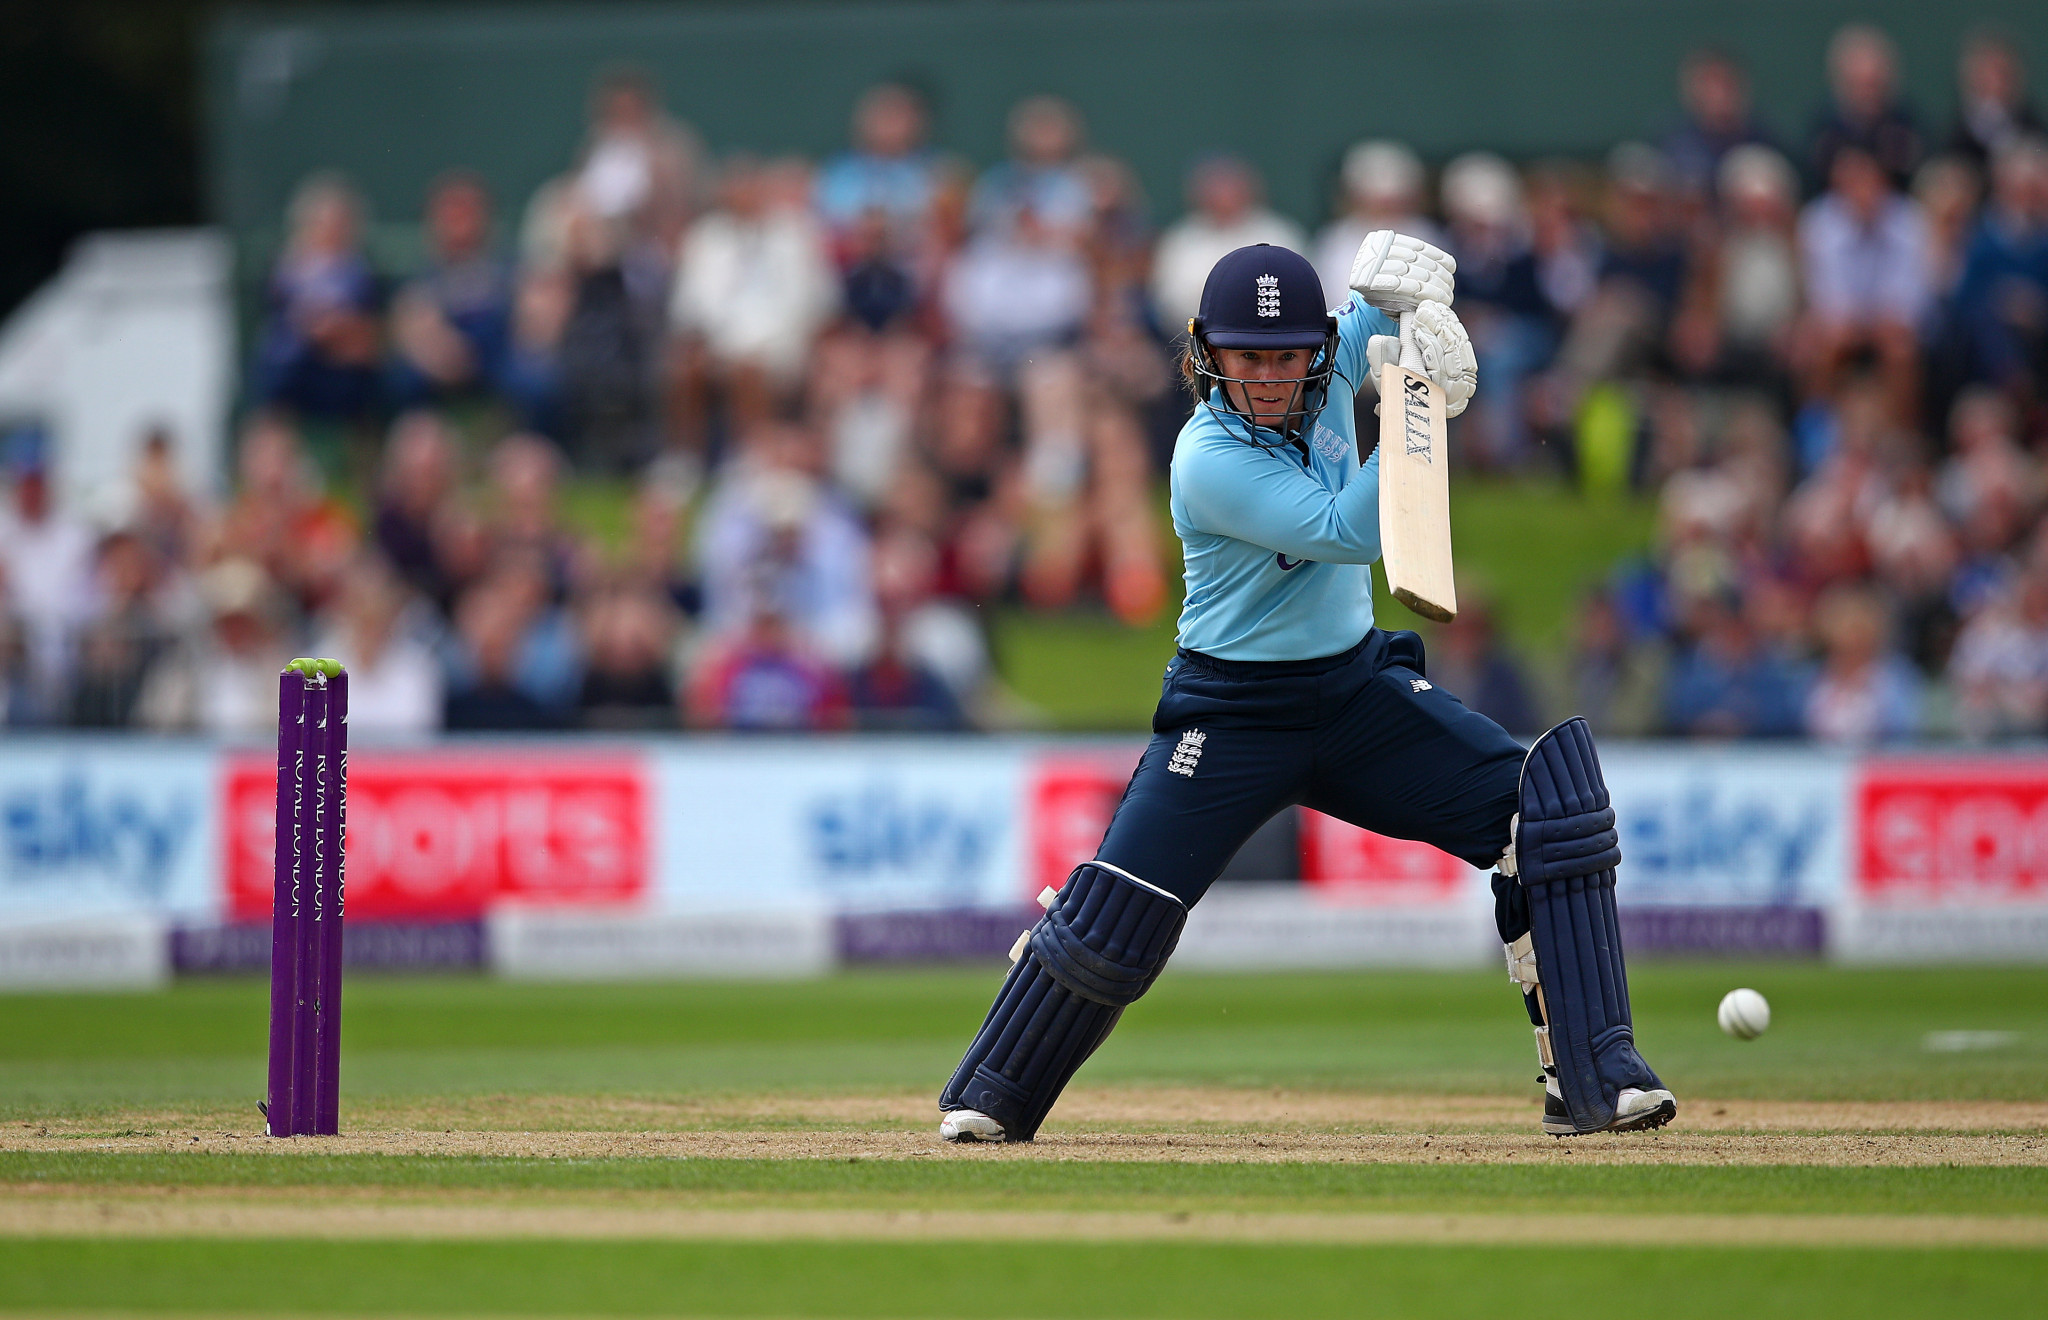 England will be the defending champions at next year's Women's Cricket World Cup ©Getty Images